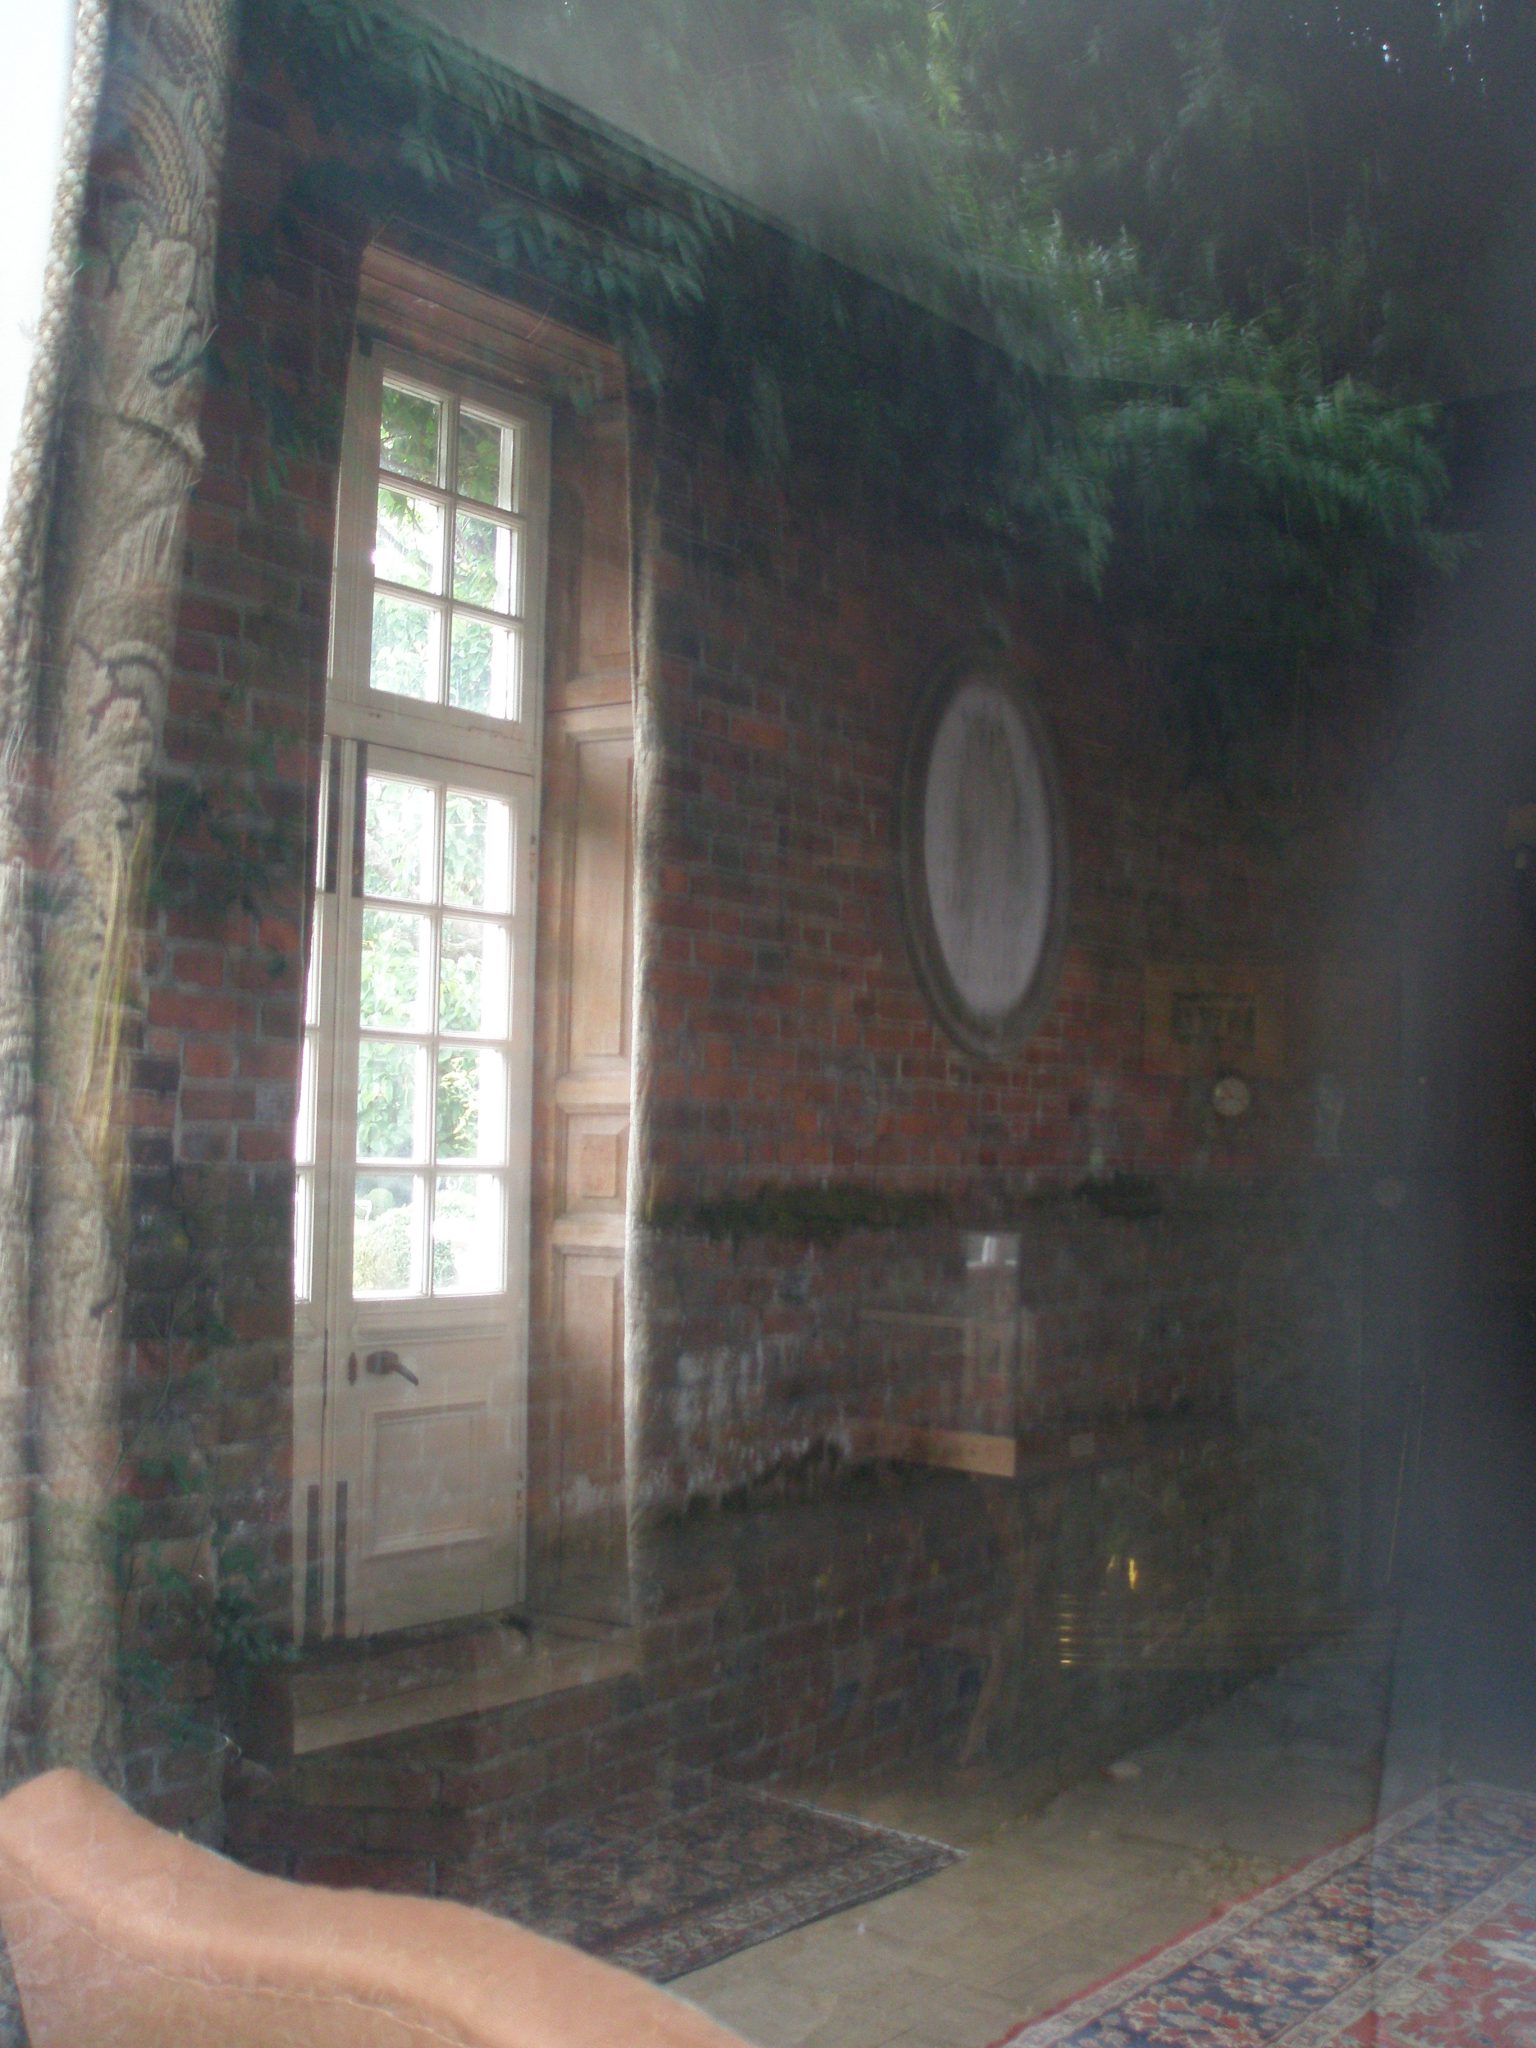 I peered through Lamb House's parlor window, and got a glimpse of these French doors, which lead to the private garden (yes...I'll photograph that, when I'm back in Rye).